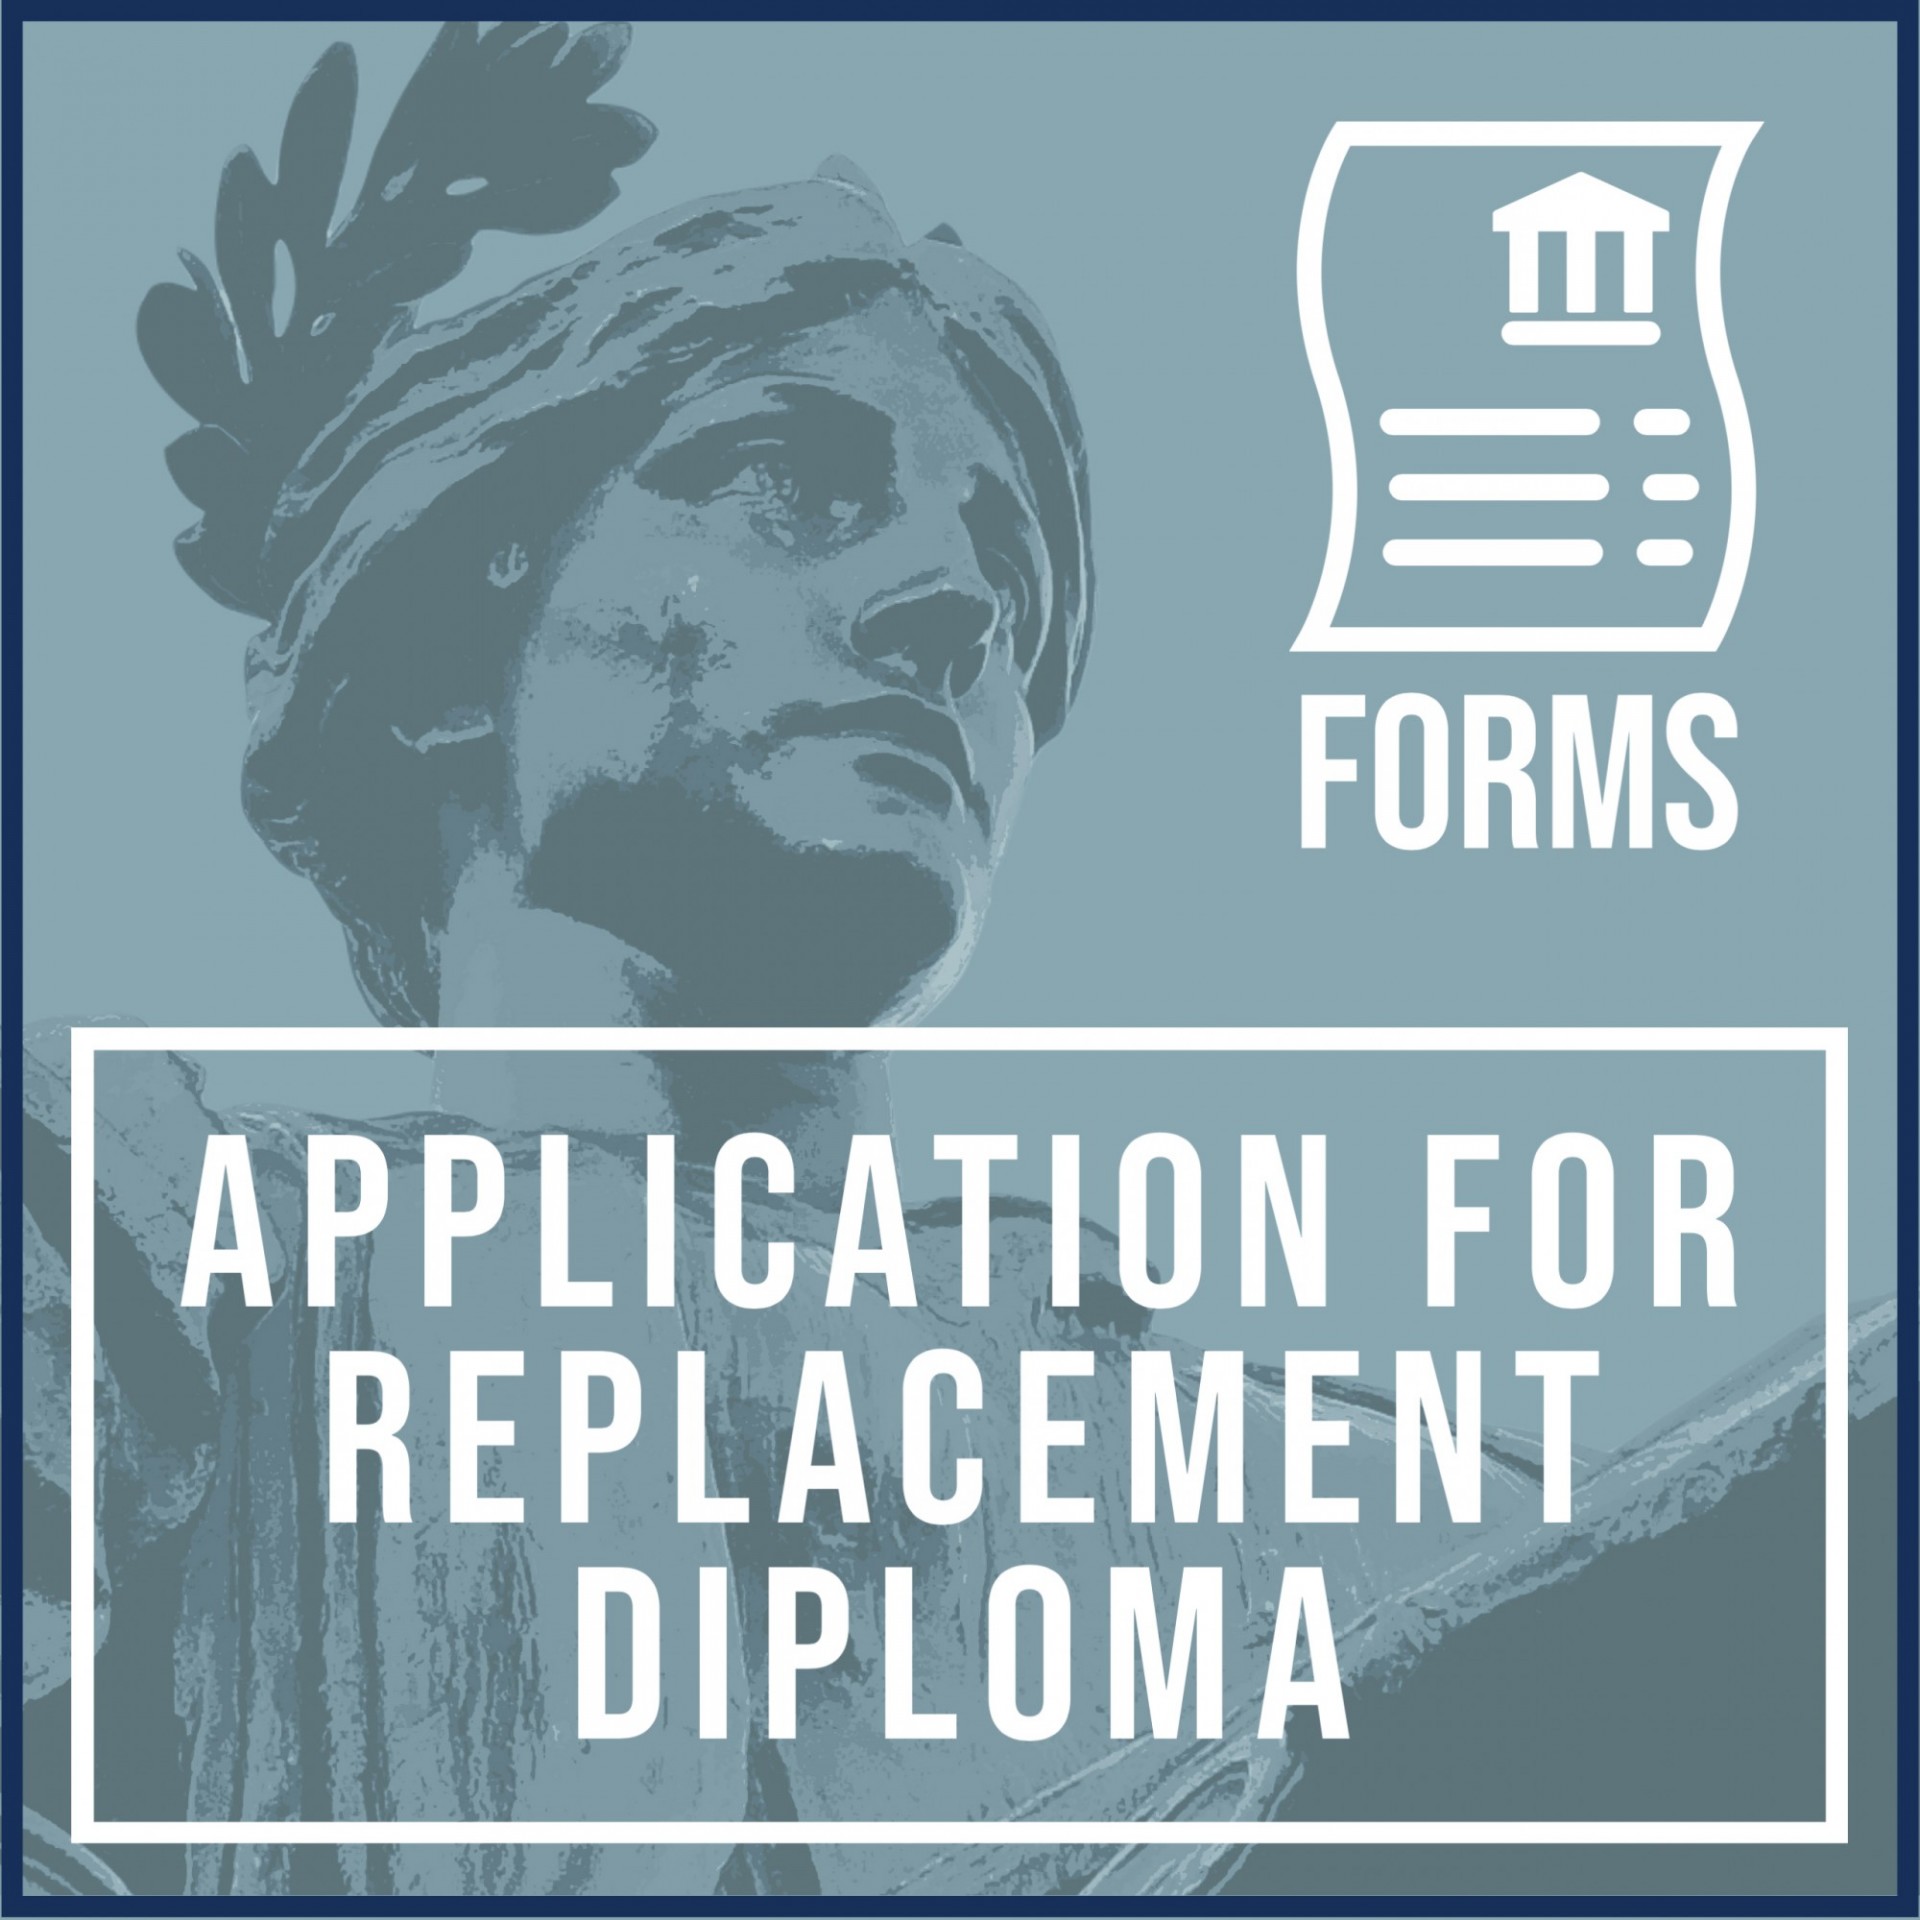 FORMS ICON: APPLICATION FOR REPLACEMENT DIPLOMA